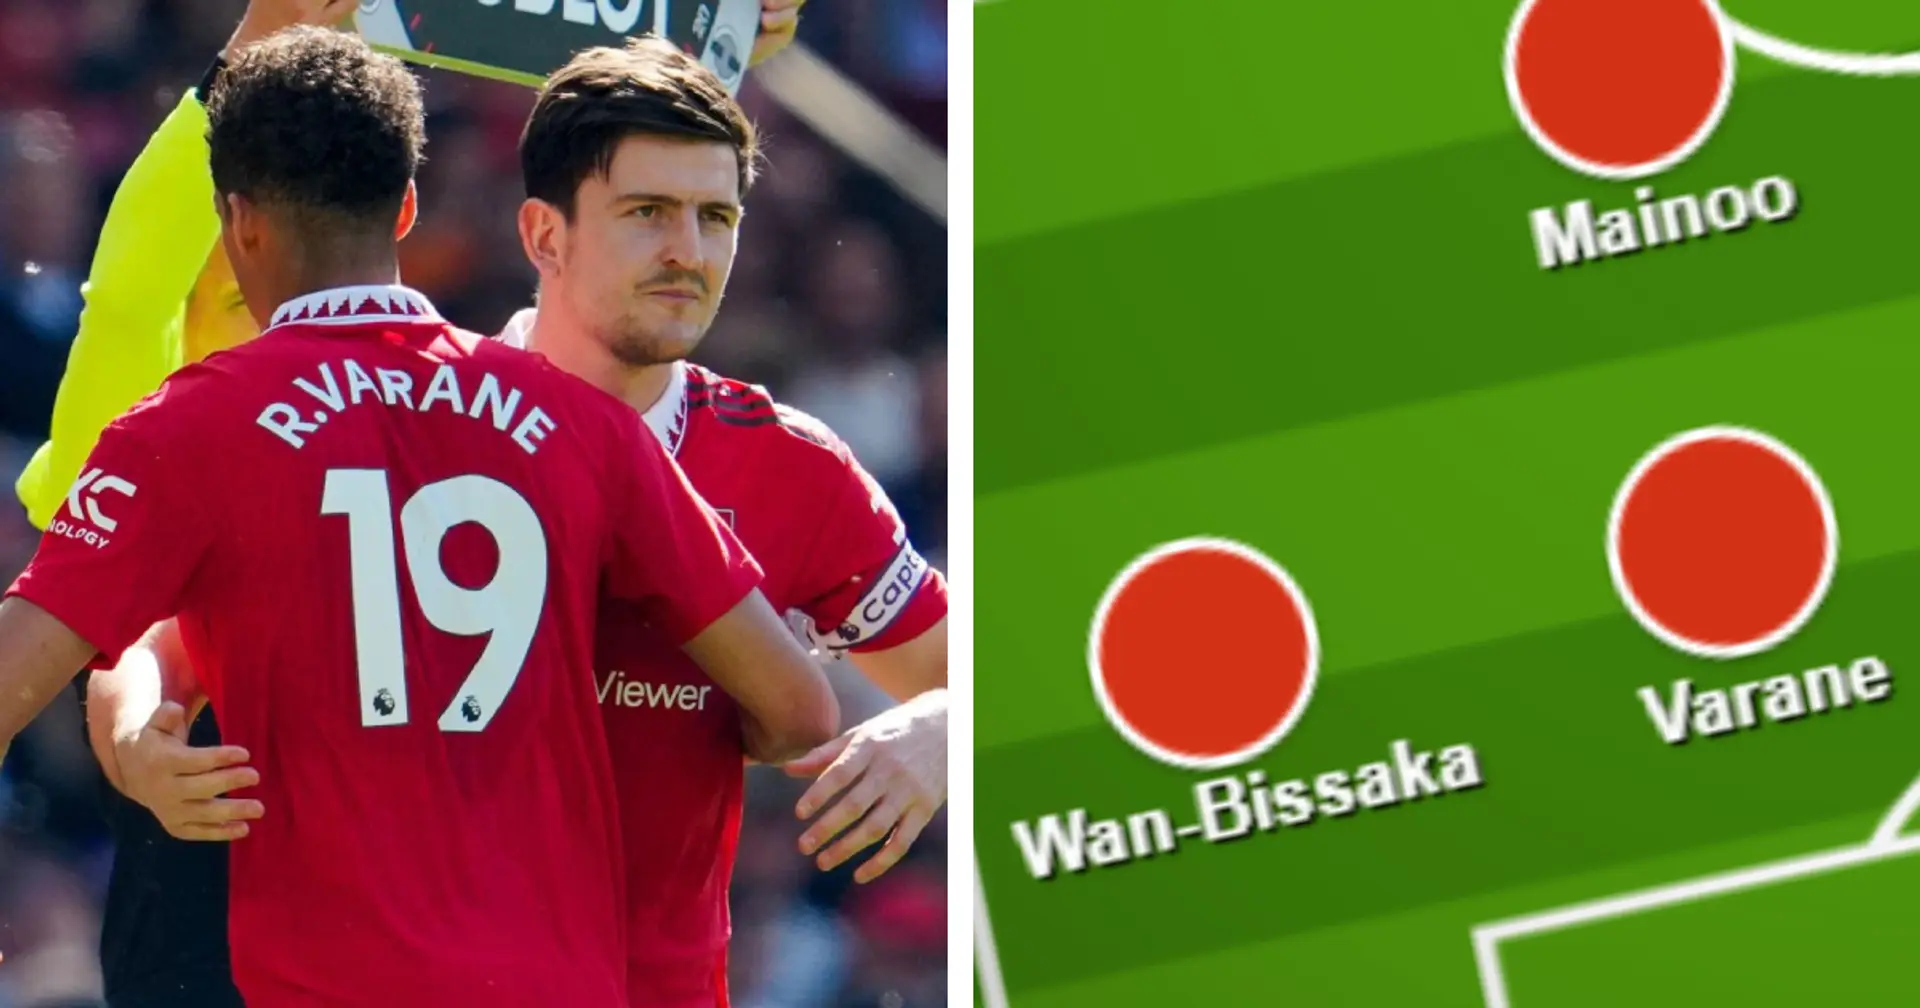 Return of Maguire-Varane partnership: Man United fans select ultimate XI for Chelsea game